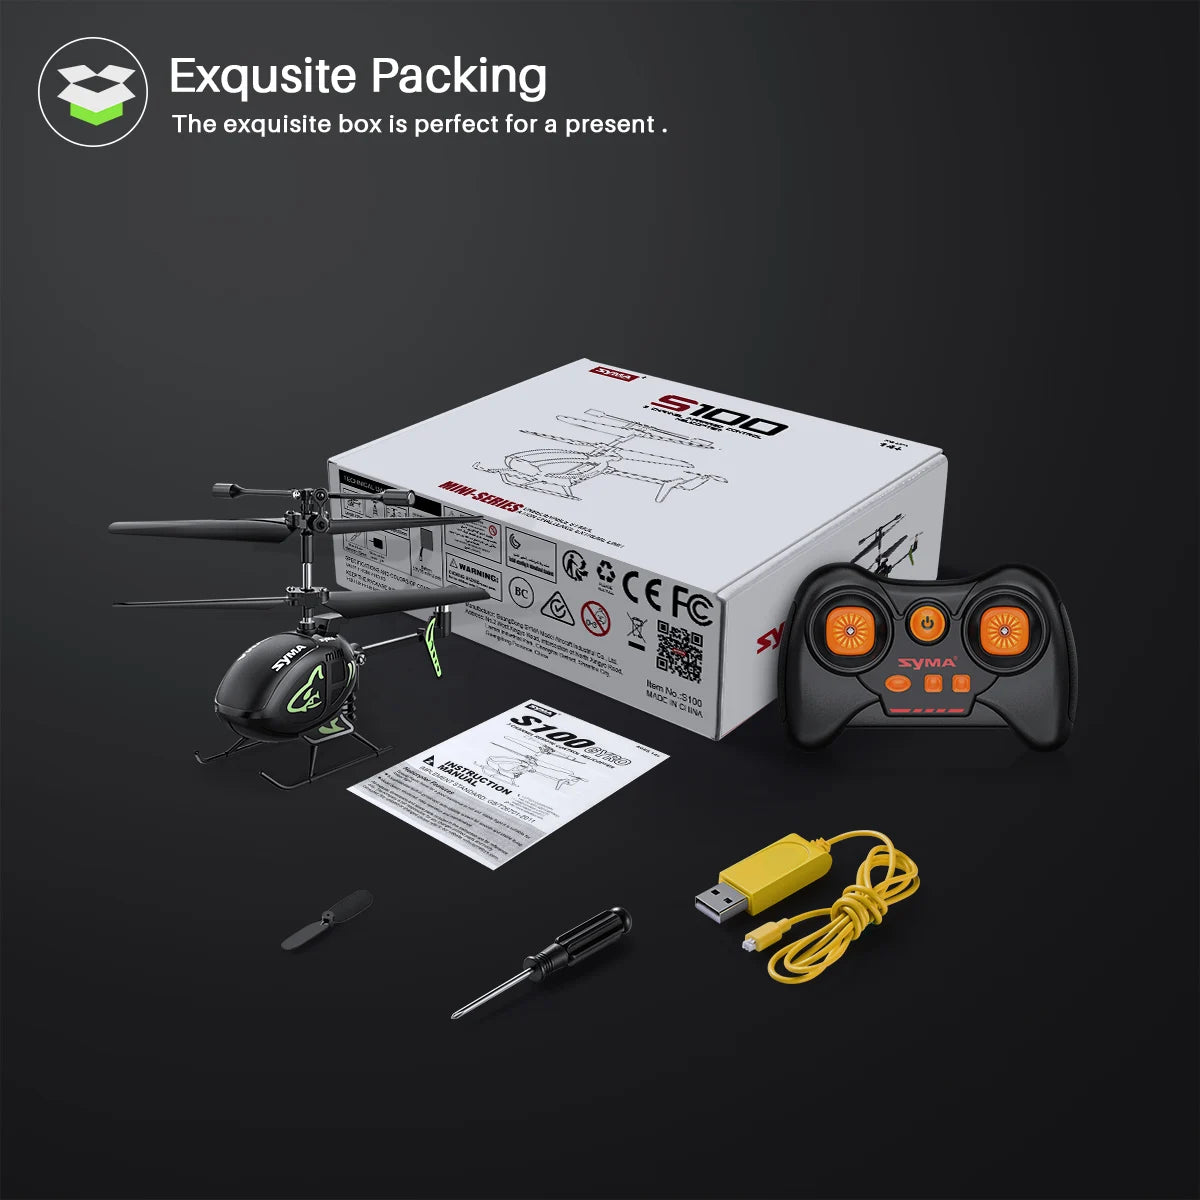 SYMA S100 Mini Helicopter, exquisite box is perfect for a present Cefc SYMA' 4d 